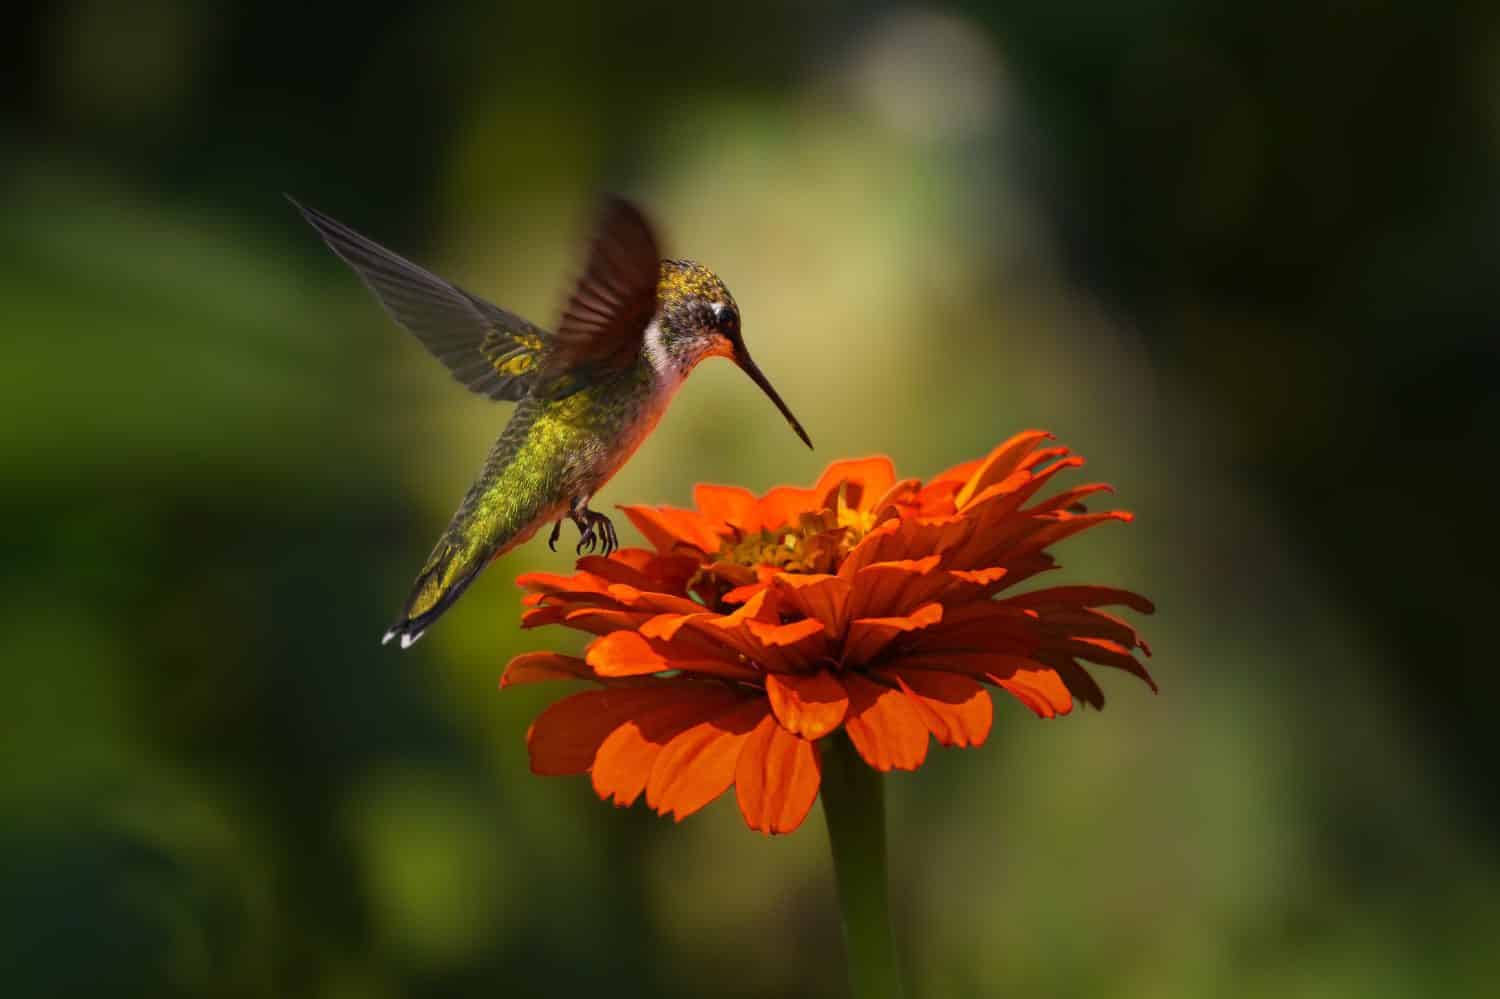 The ruby-throated hummingbird (Archilochus colubris) is a species of hummingbird that generally spends the winter in Central America, Mexico, and Florida, and migrates to Canada and other parts of Eas